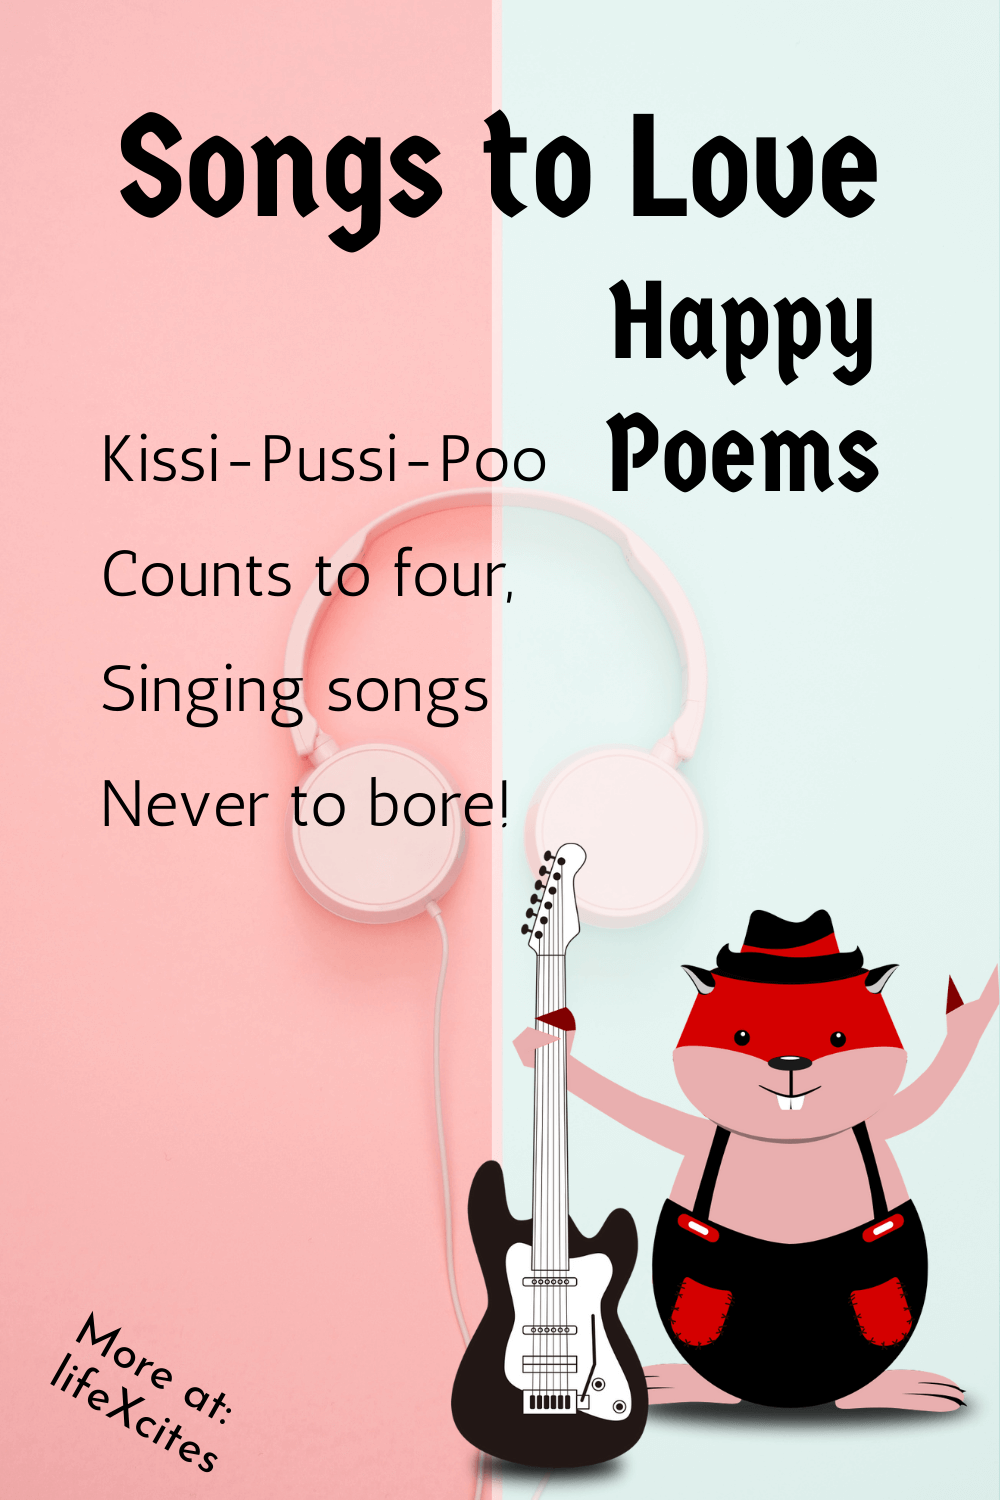 Songs to Love Happy Poems